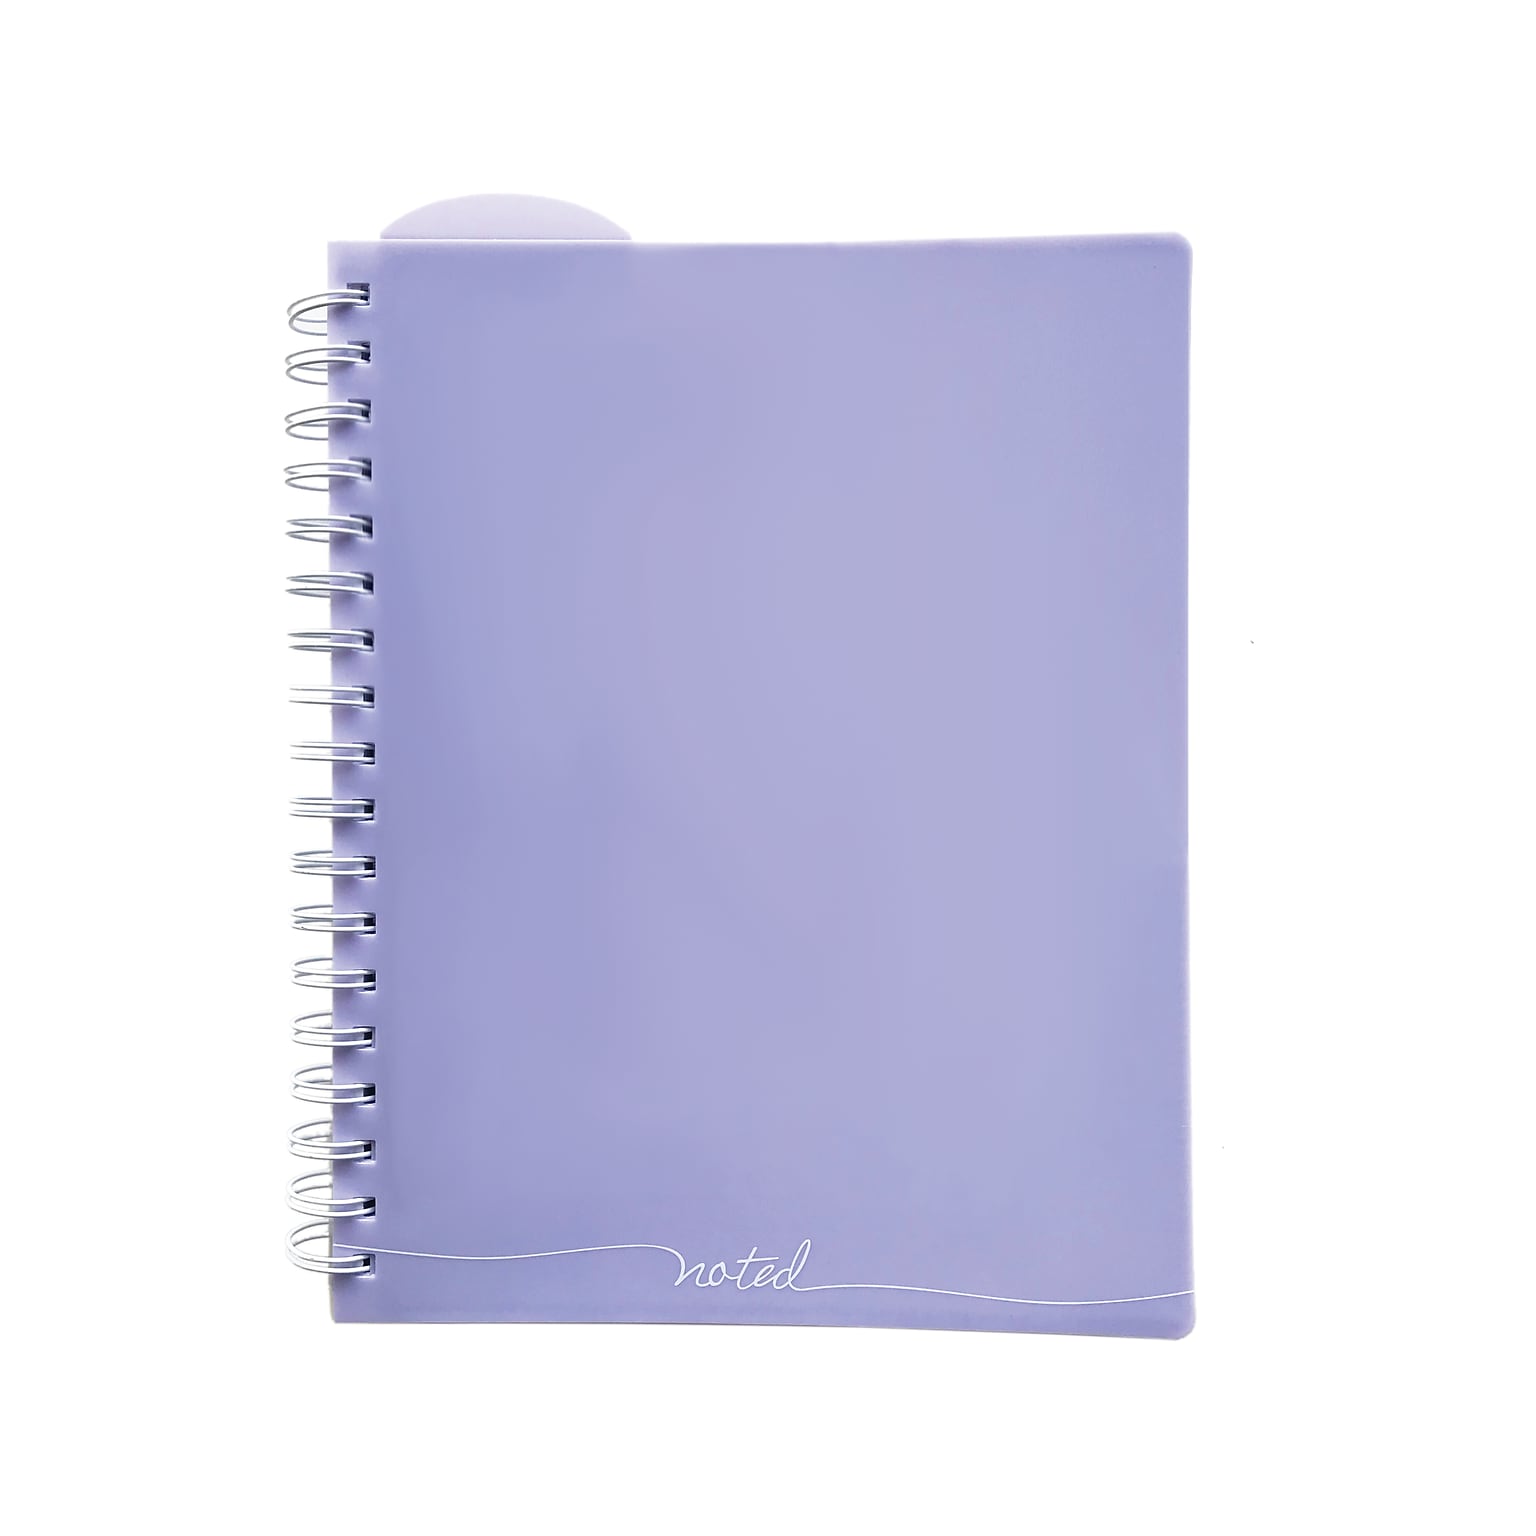 Carolina Pad Noted Premium Executive Notebook, 7.38 x 9.5, Lined, 100 Sheets, Assorted Colors (13008)